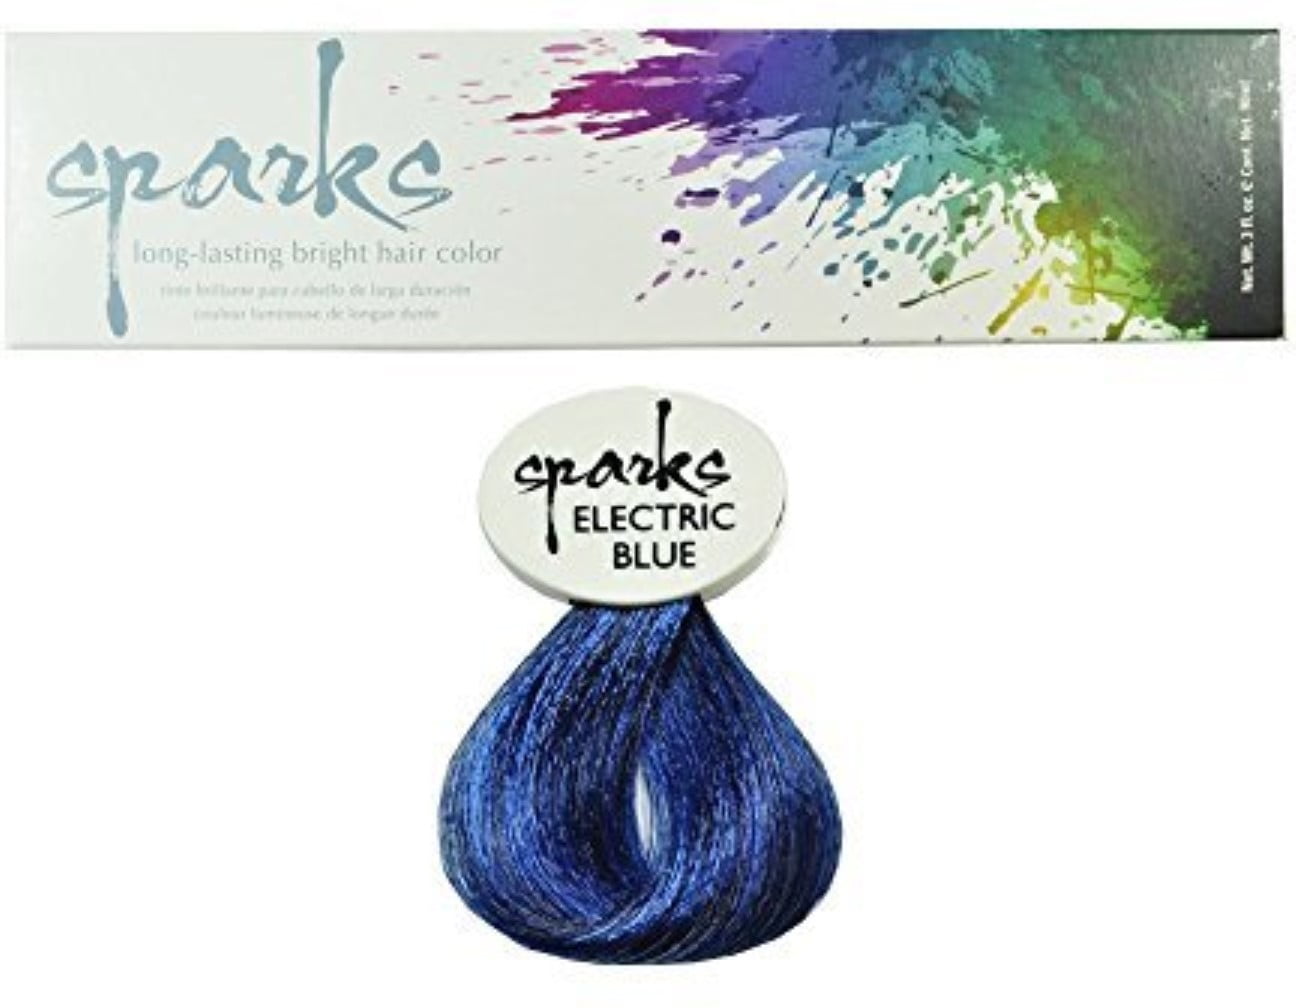 9. Sparks Long-Lasting Bright Hair Color - Electric Blue - wide 7